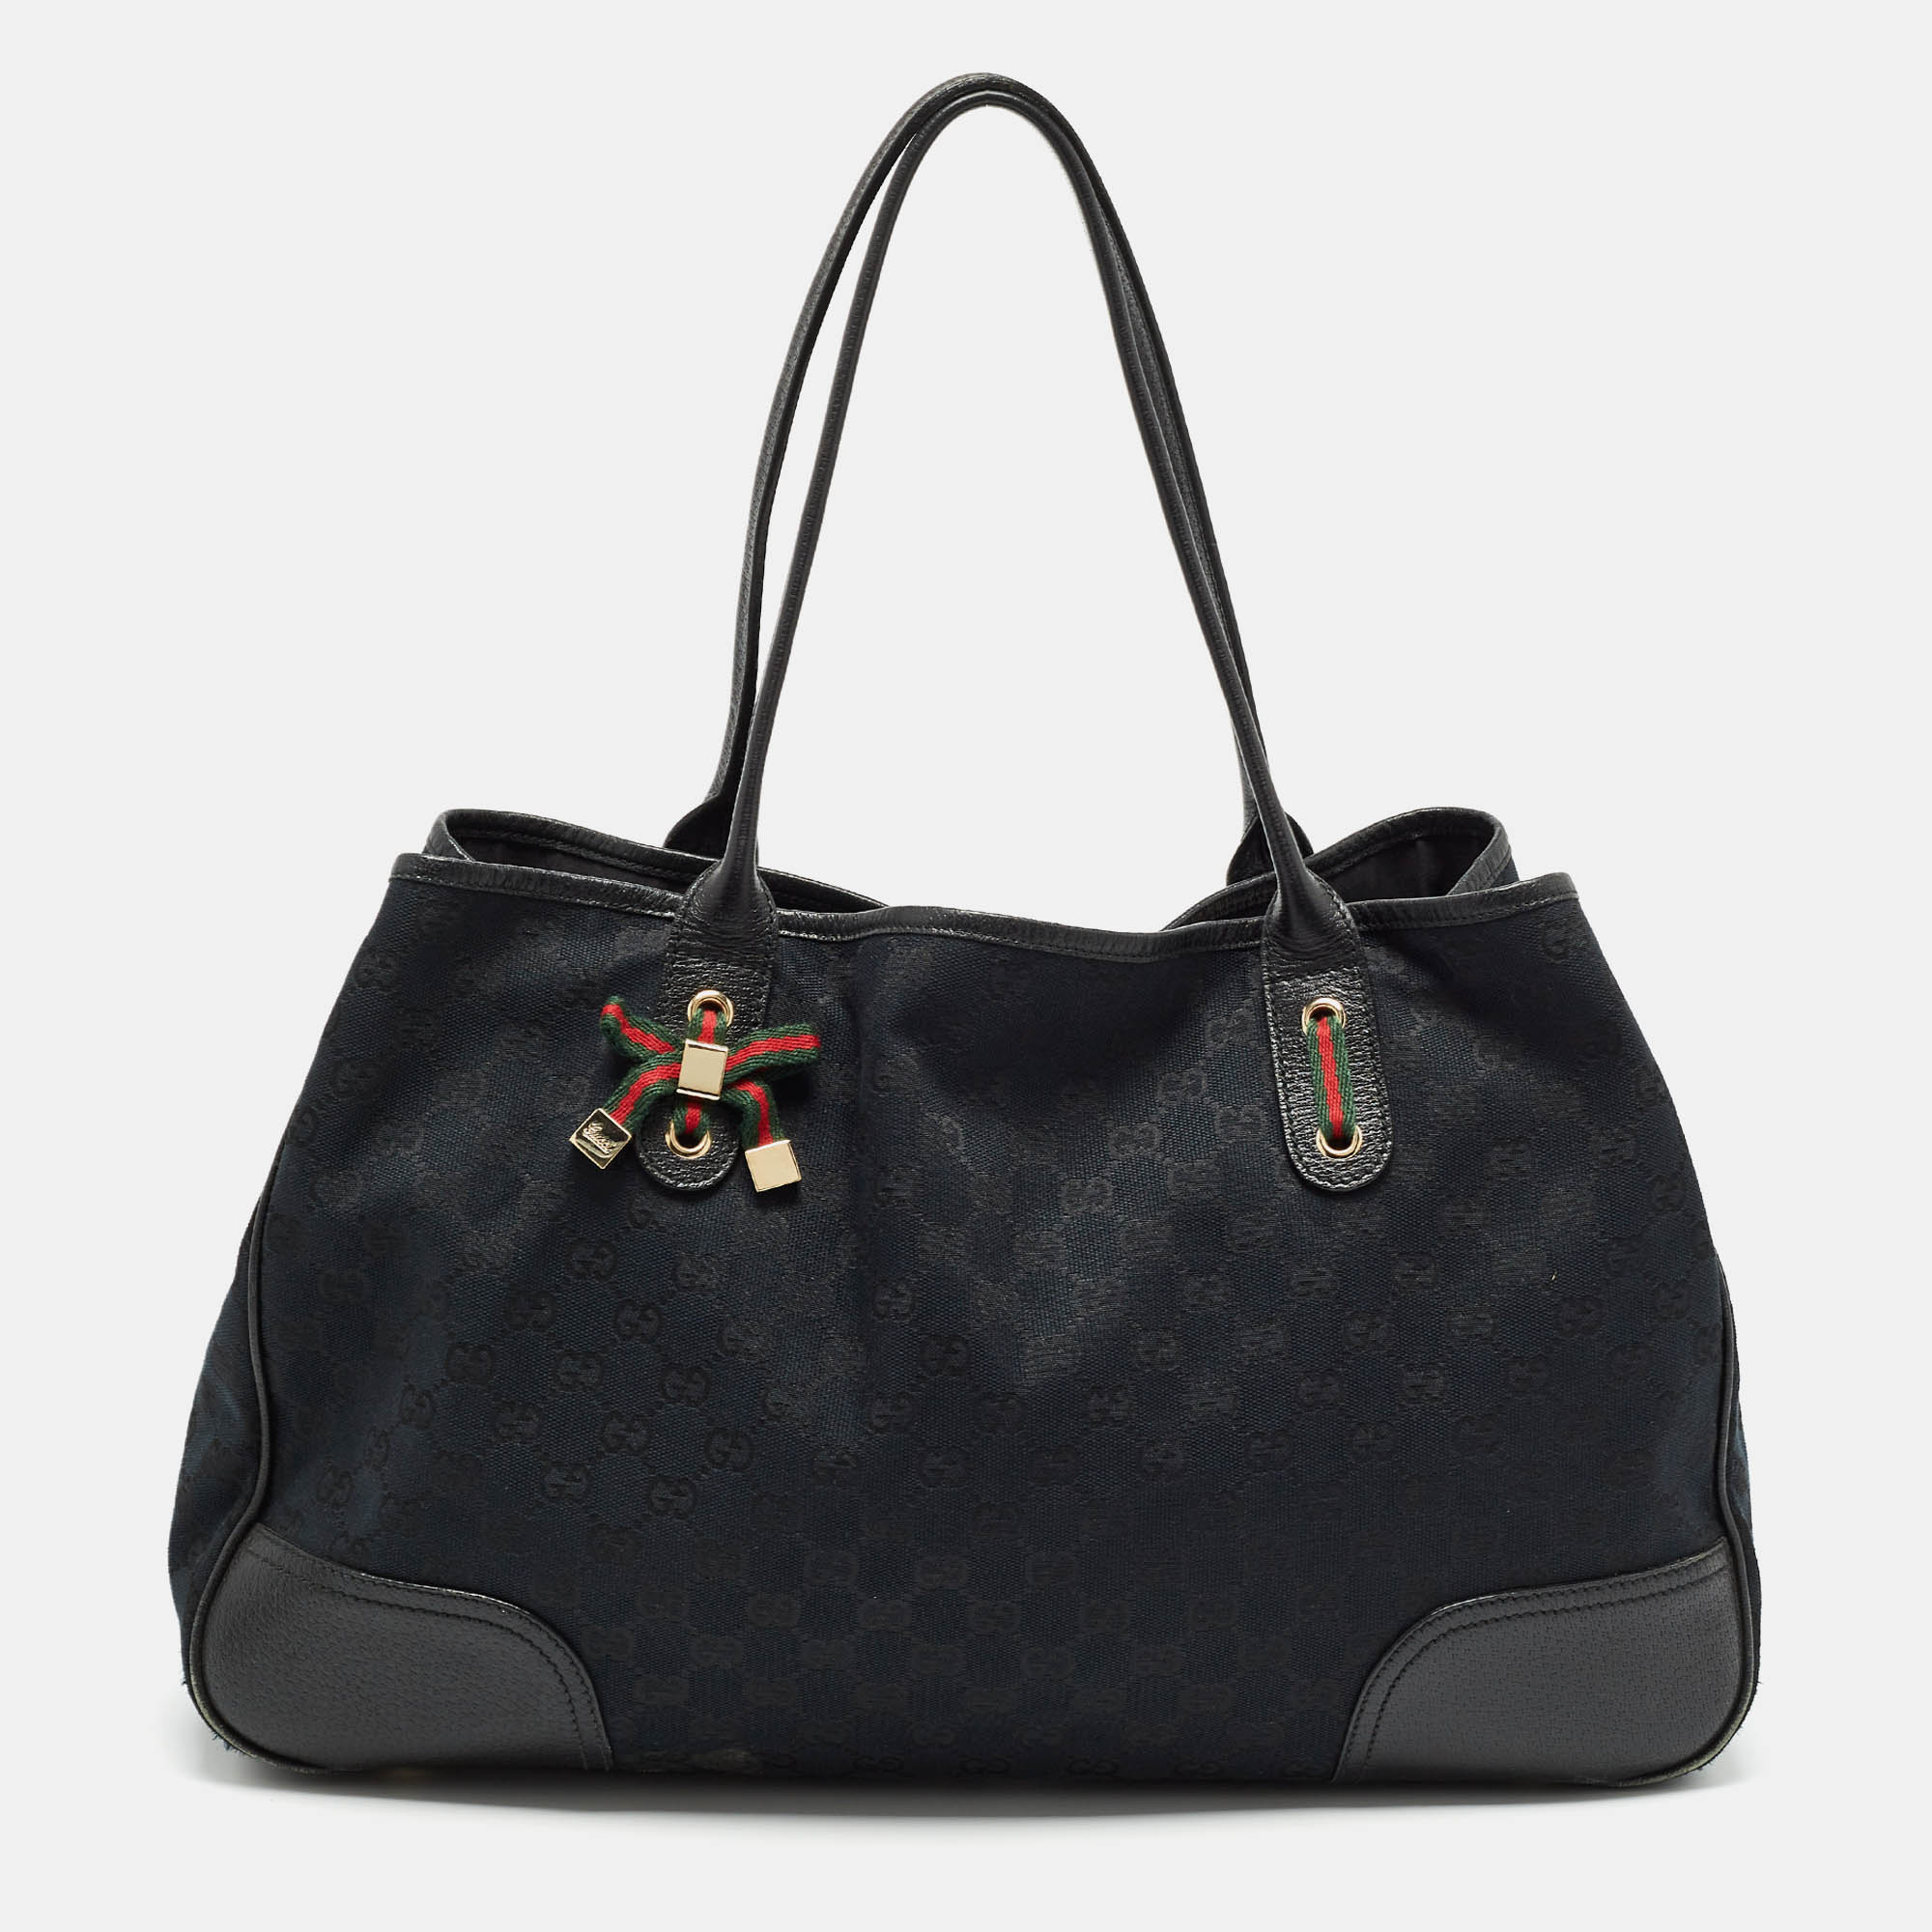 Gucci black gg canvas and leather large princy tote